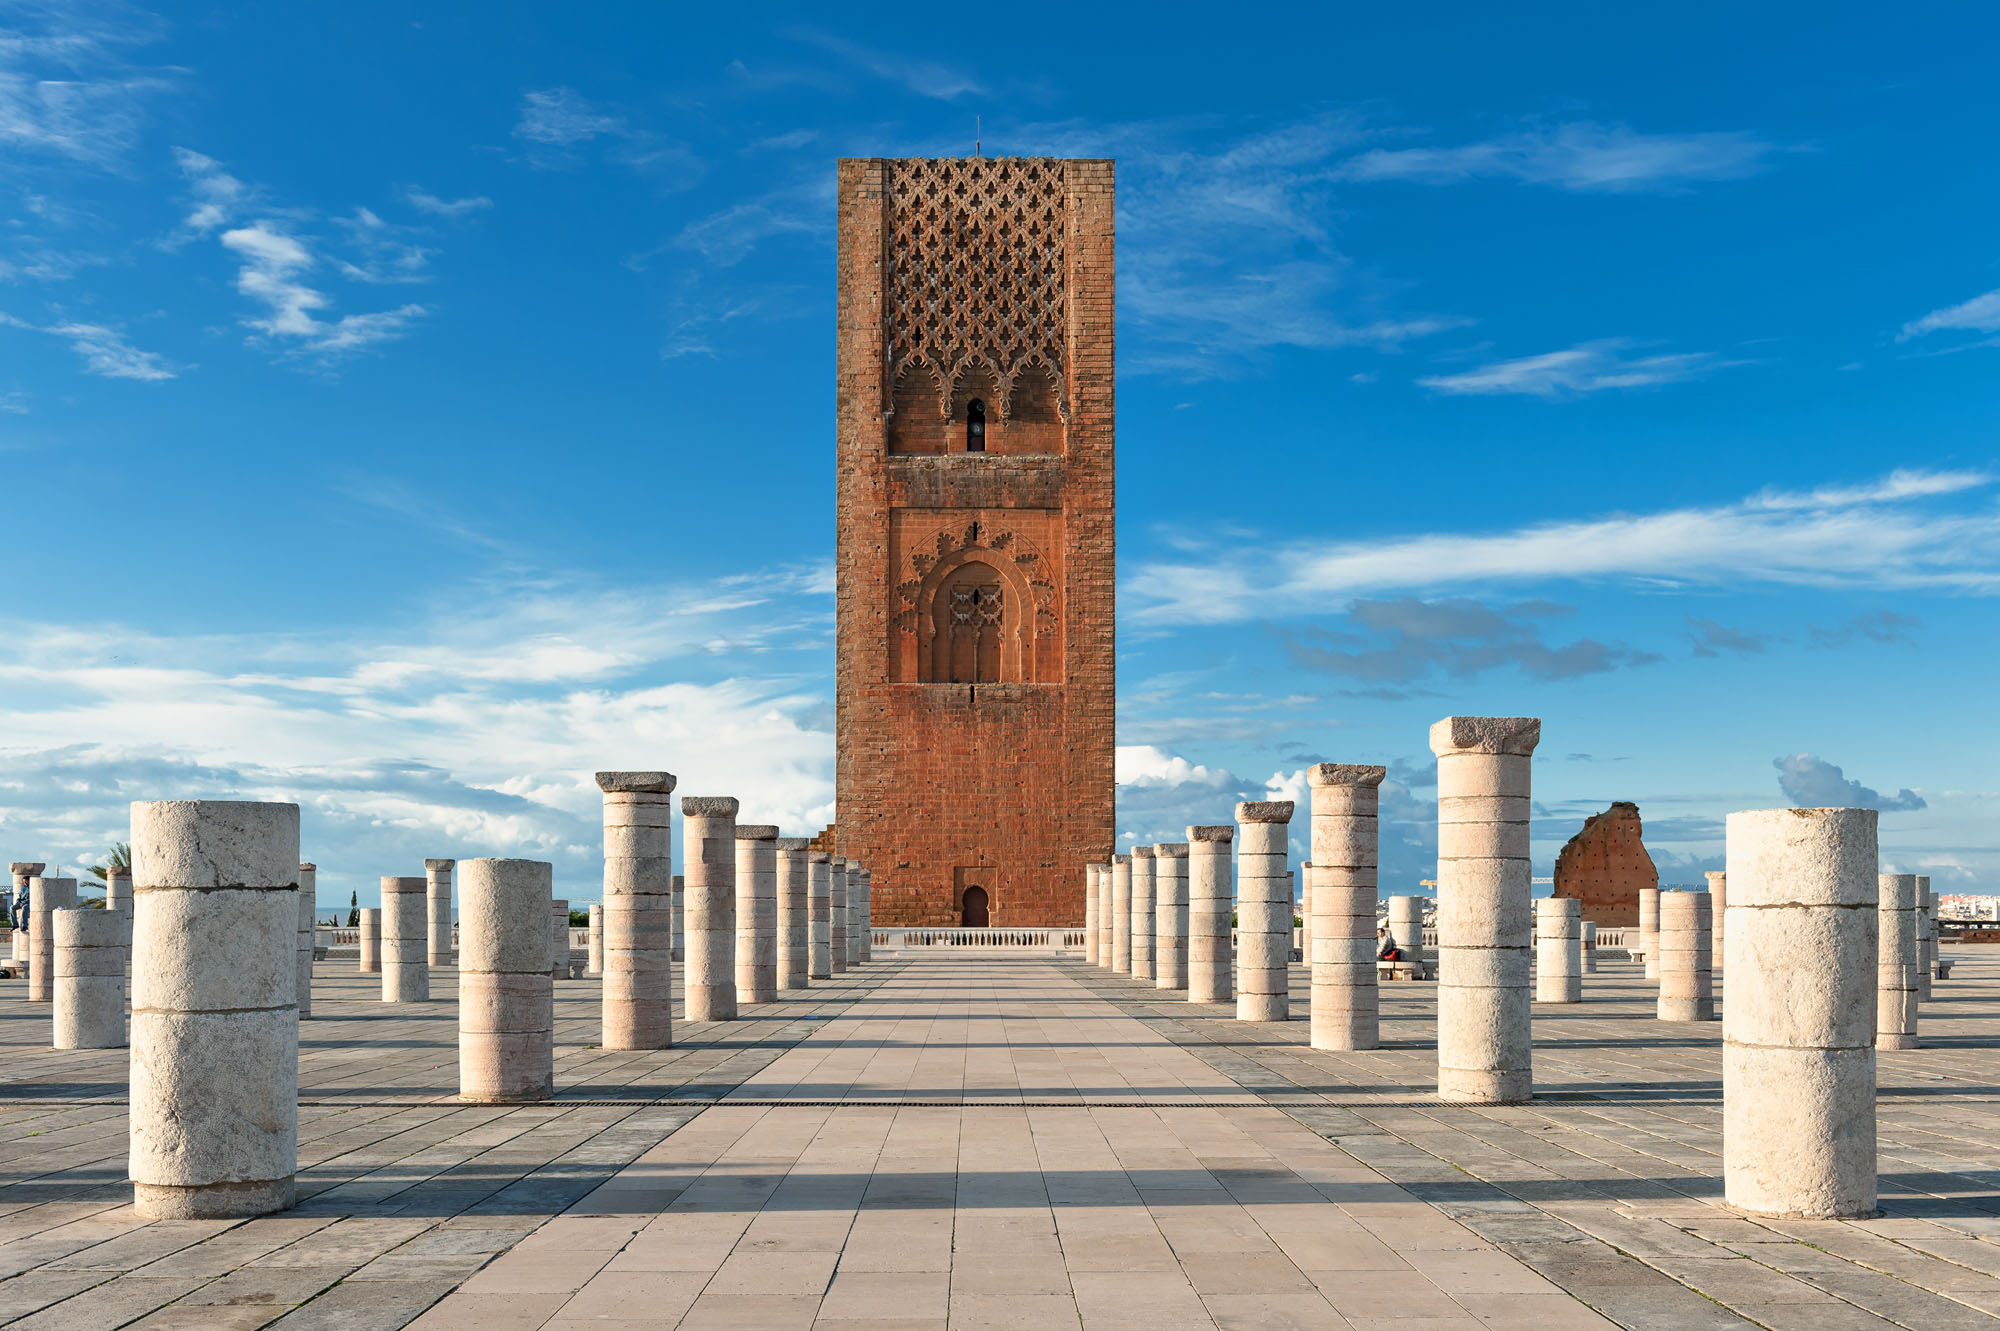 Combined imperial cities and desert tour of Morocco | 6 days